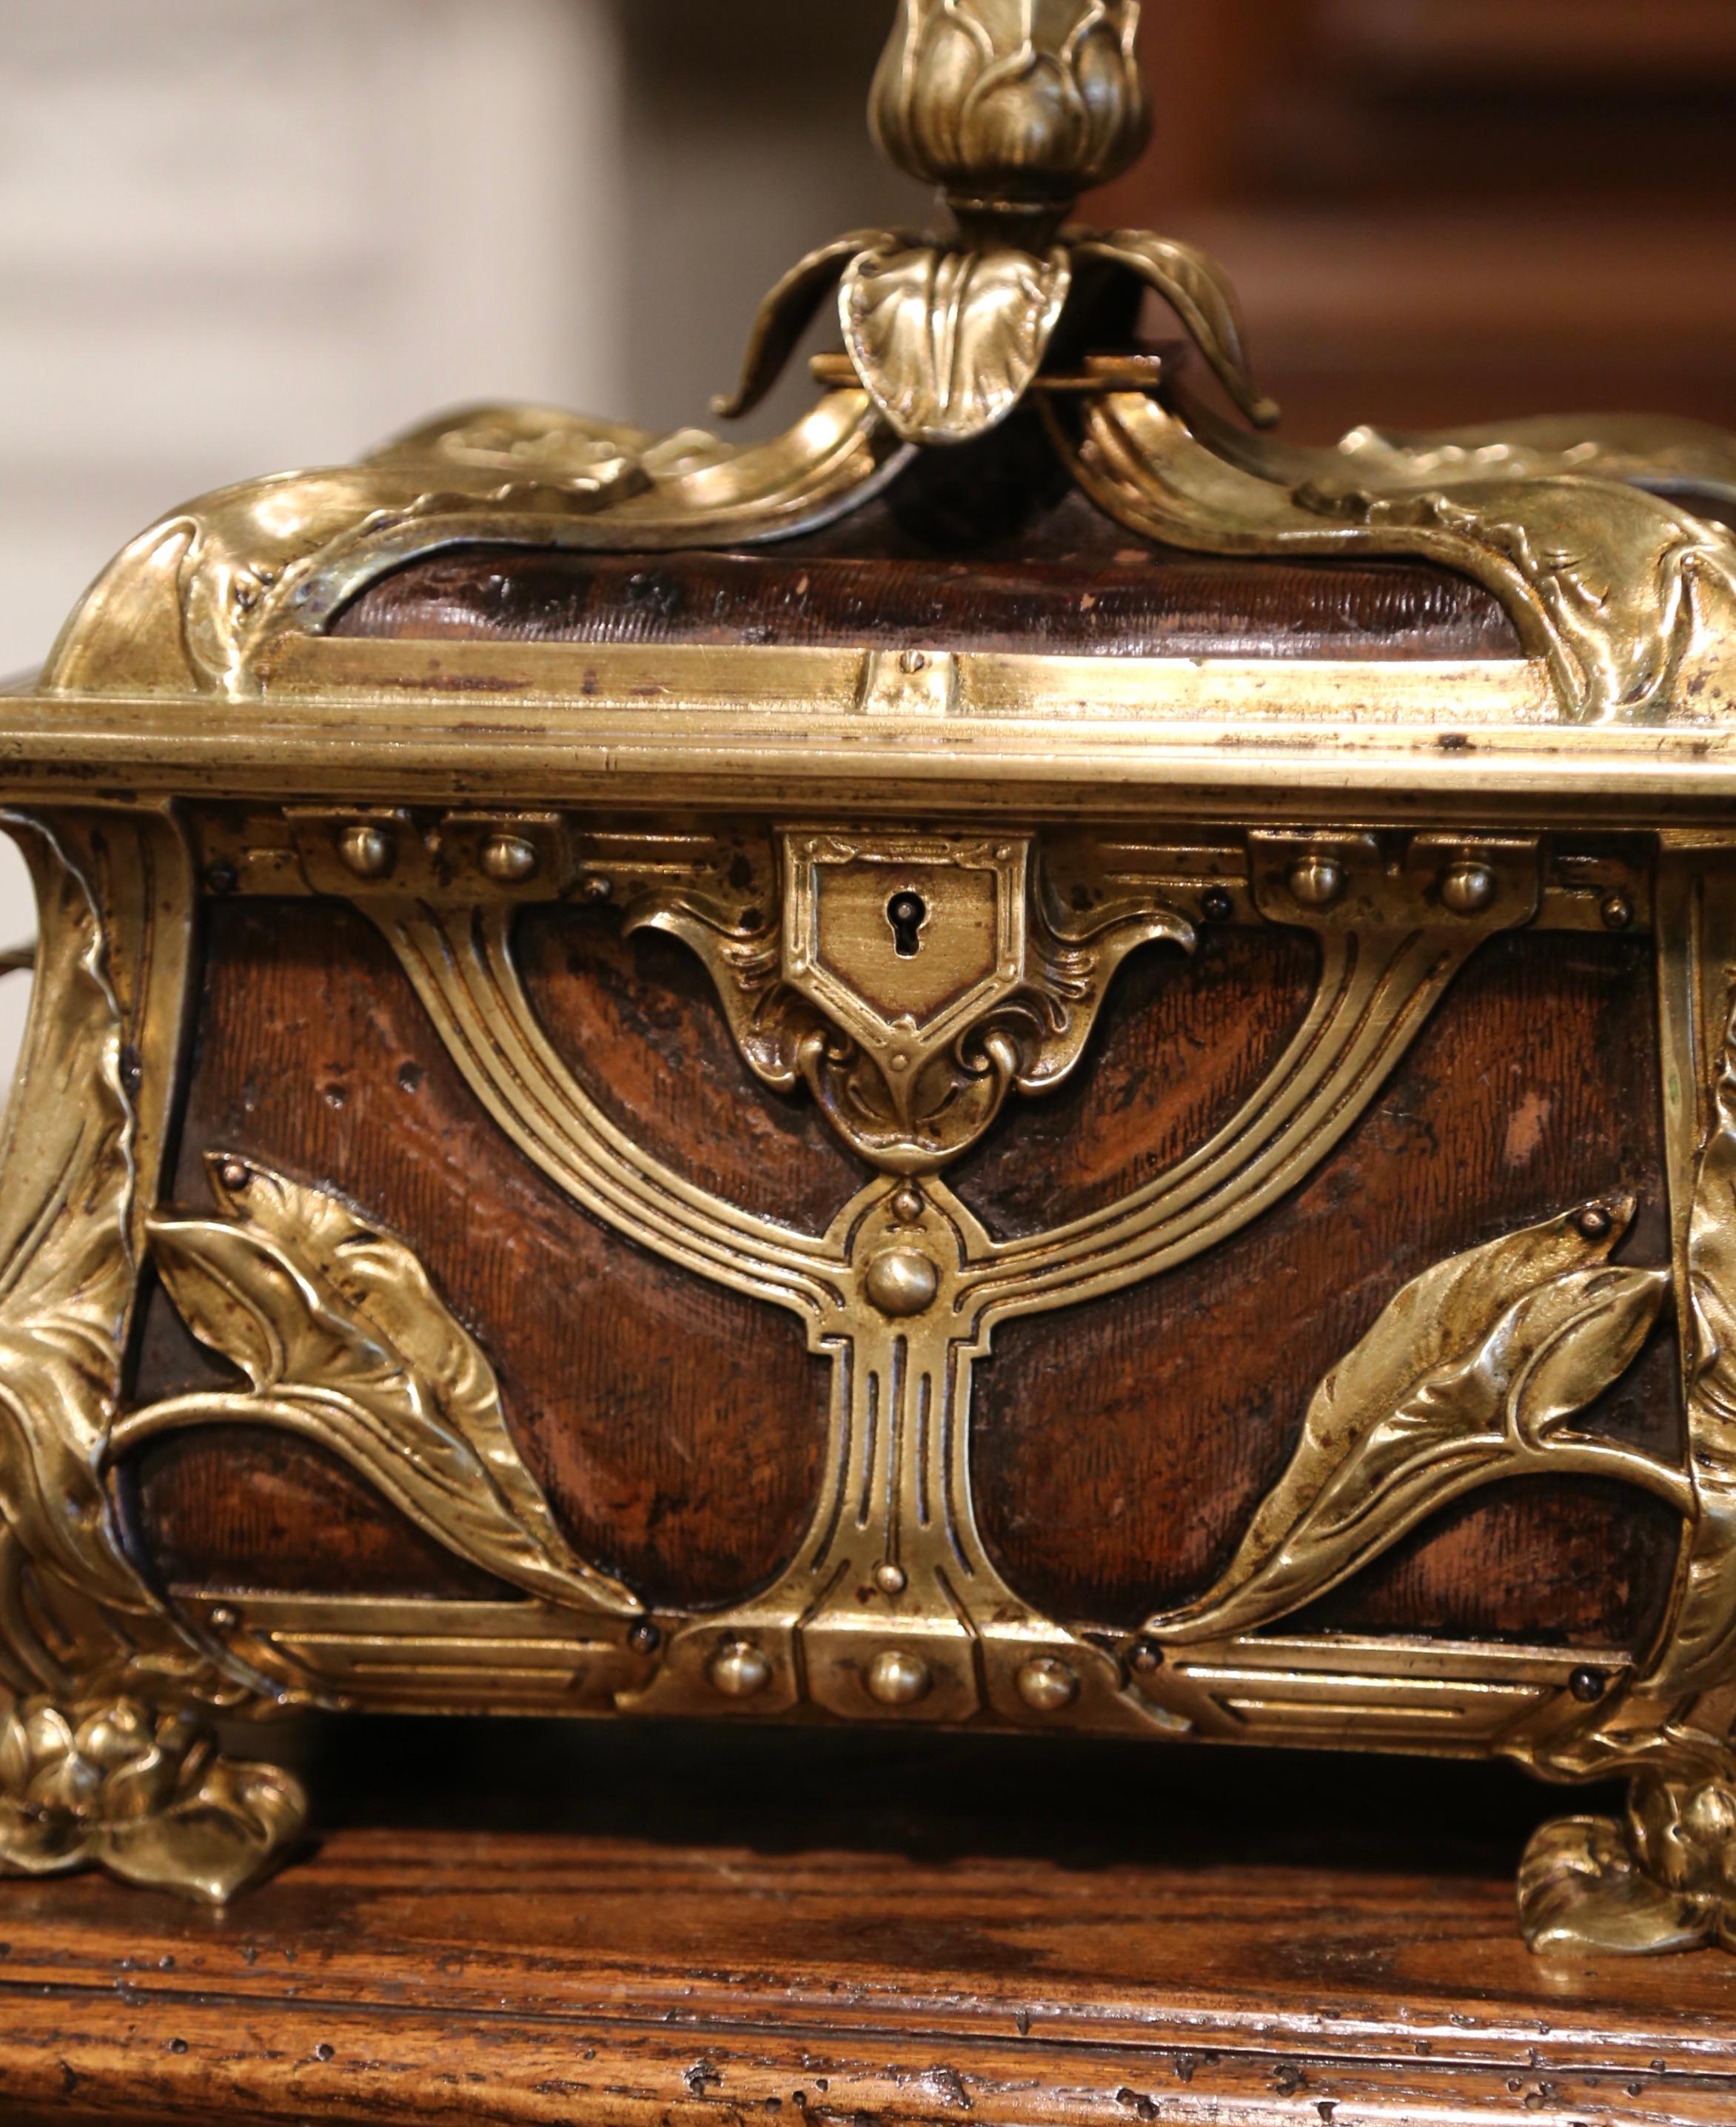 This antique casket was created in France, circa 1880. Rectangular in shape and resting on flower form feet, the gilt bronze box is dressed with a floral finial at the top. The Art Nouveau casket with bombe sides features ormulu leaf decor over red